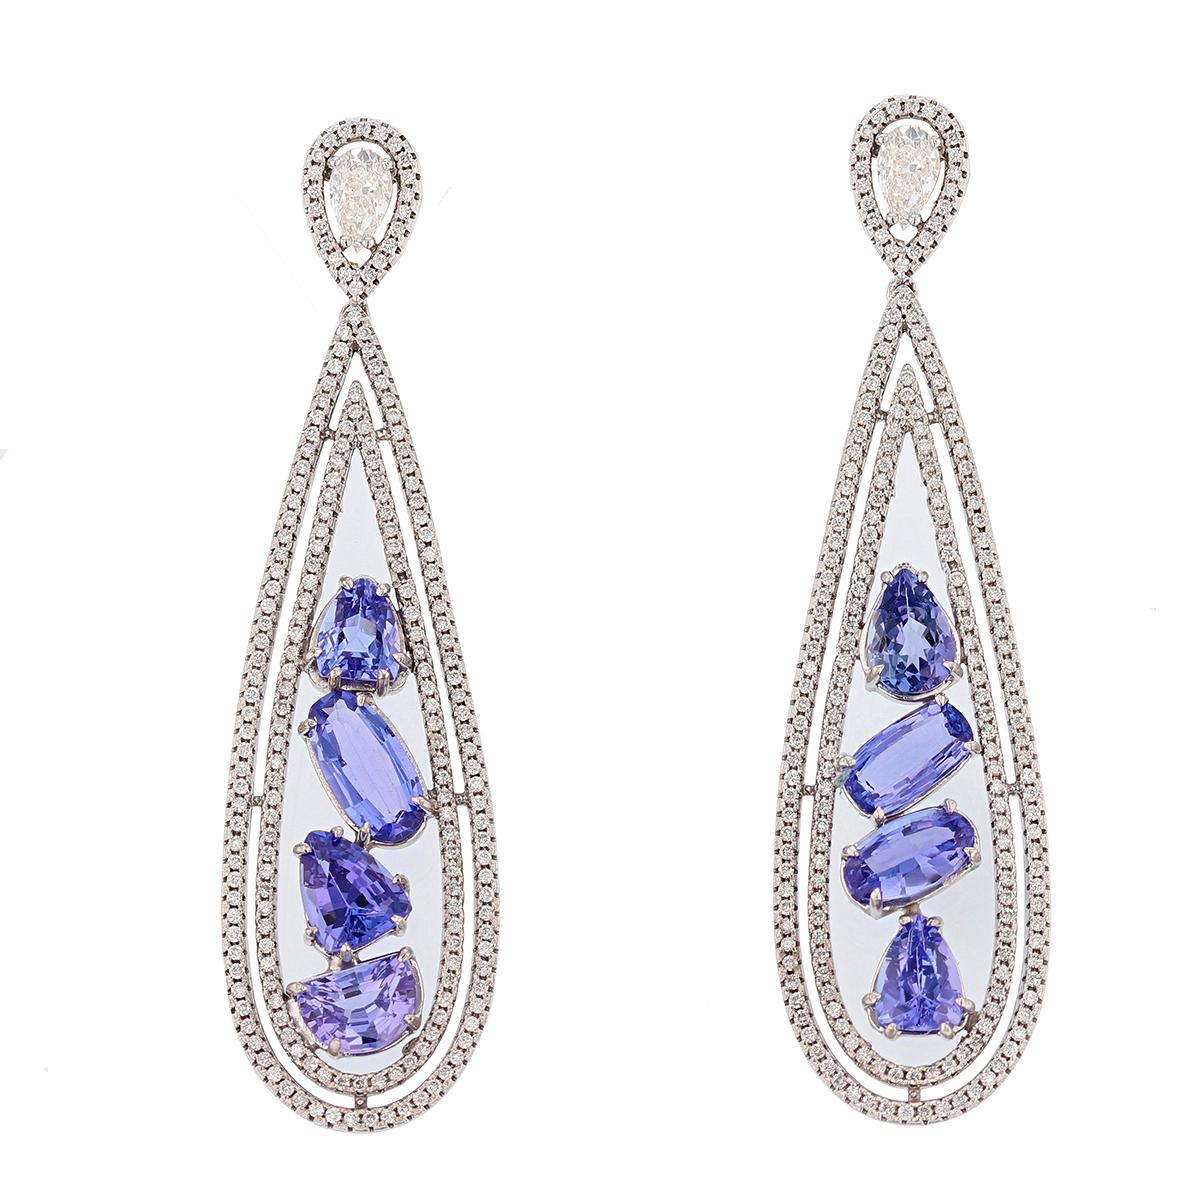 These earrings are made of 14k white gold and features eight tanzanites weighing 8.14ct prong set. The earrings also feature two pear cut diamonds weighing 0.90ct and four hundred round cut diamonds weighing 1.60cts, pavé set. 